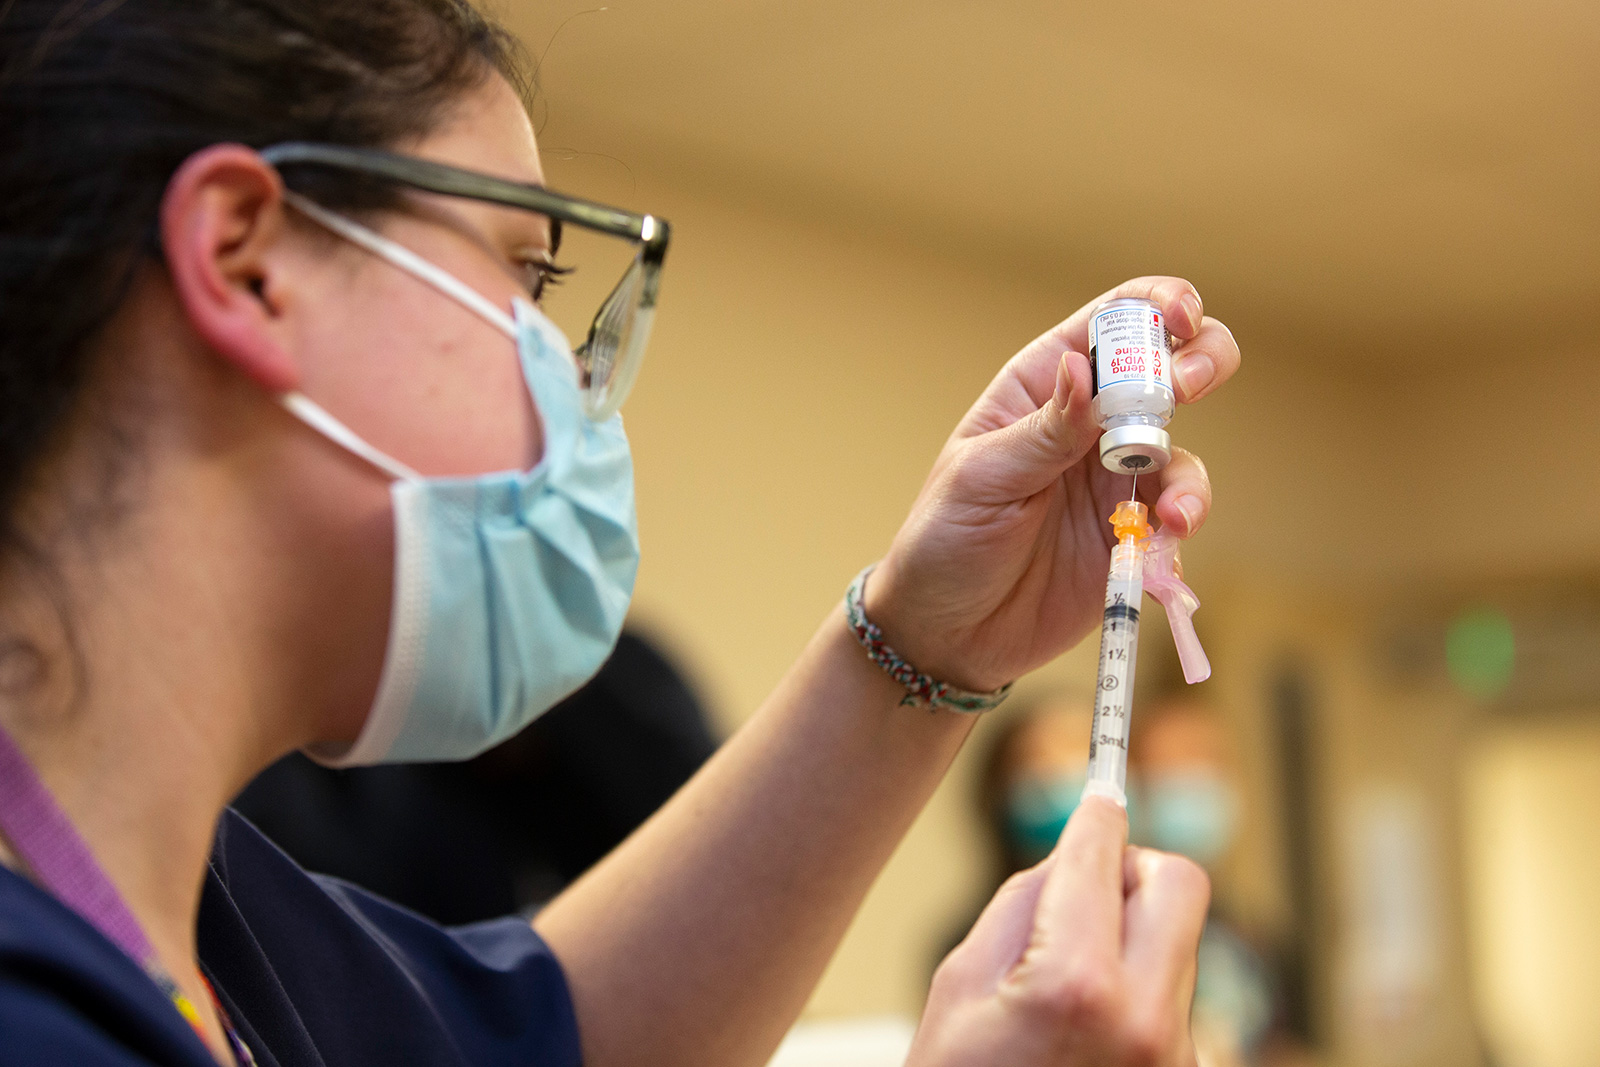 Colleen D Amico, a clinical pharmacist with Seattle Indian Health Board (SIHB) administers a shot of the Moderna Covid-19 vaccine to frontline workers at the SIHB on December 21, 2020 in Seattle, Washington. 